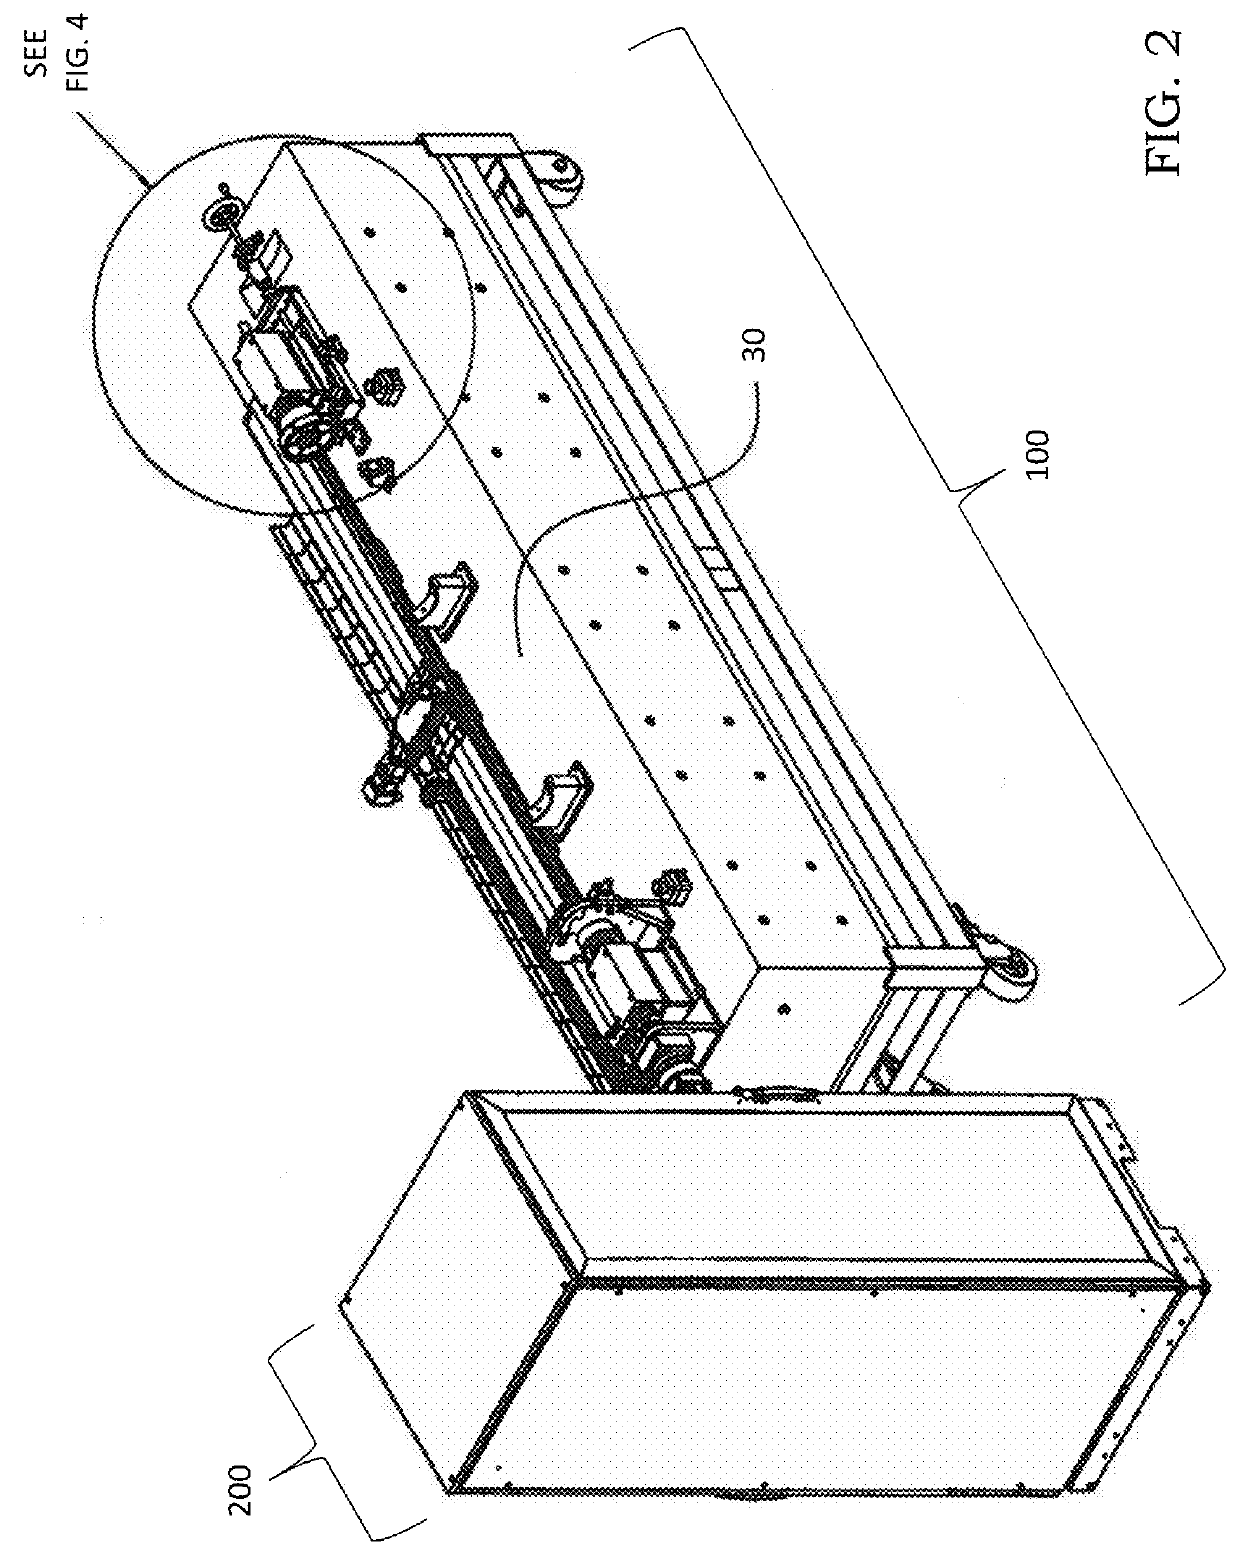 Dimensional measurement apparatus for a cylindrical object